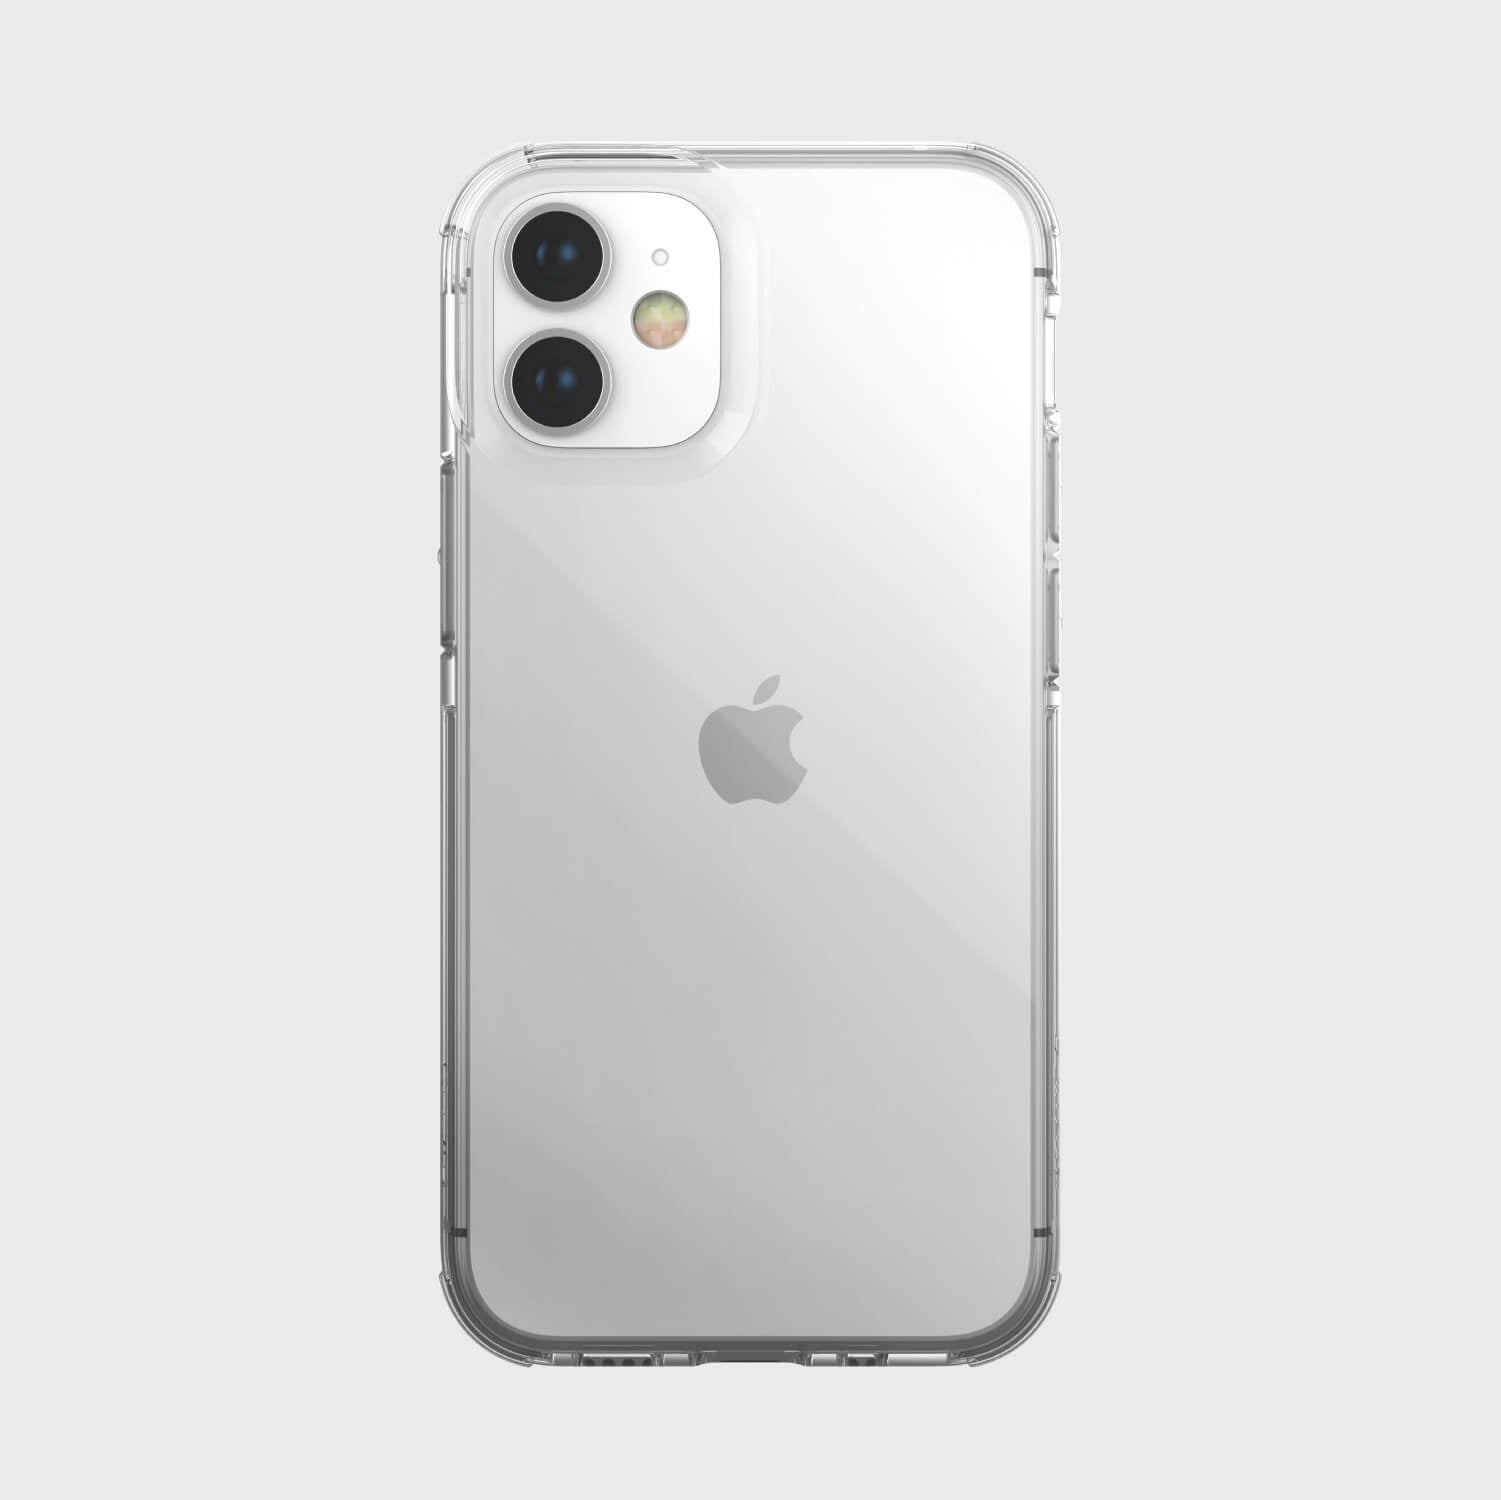 A Raptic clear iPhone 12 Mini case providing 2-metre drop protection on a white background.